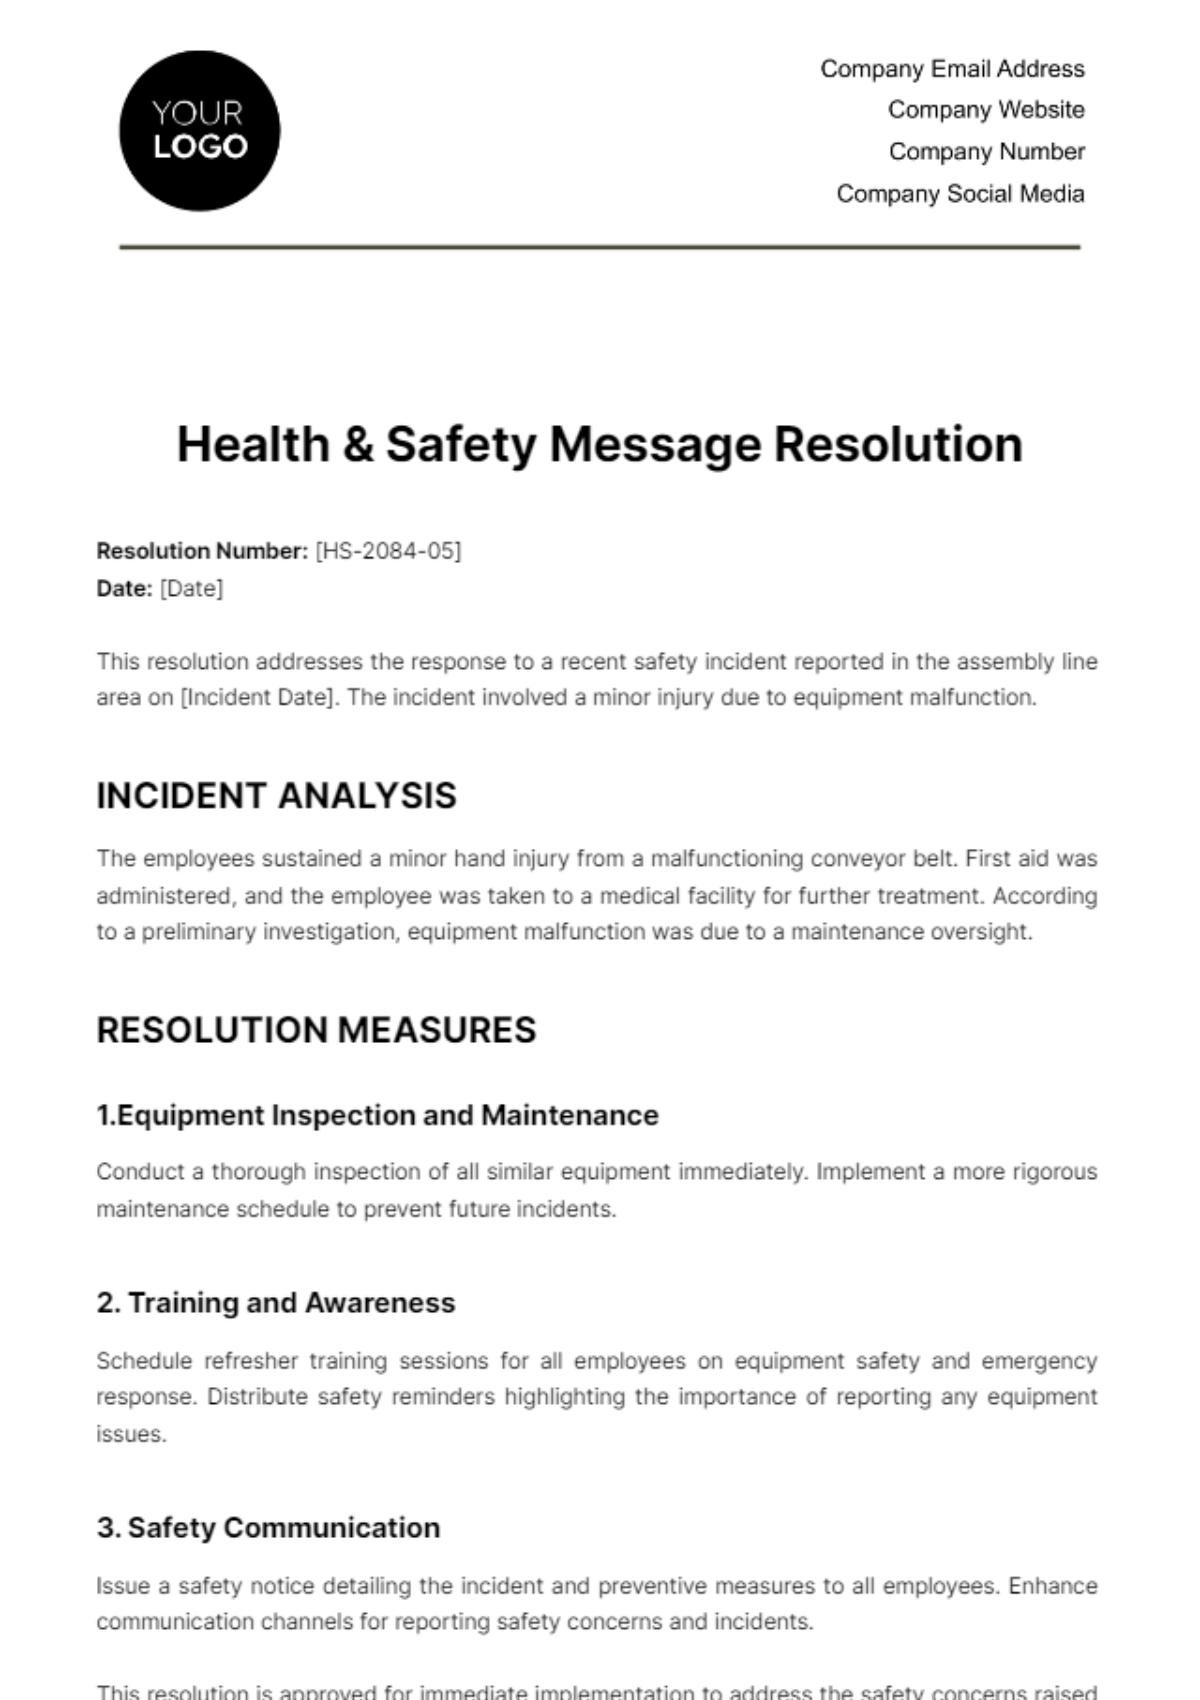 Free Health & Safety Message Resolution Template